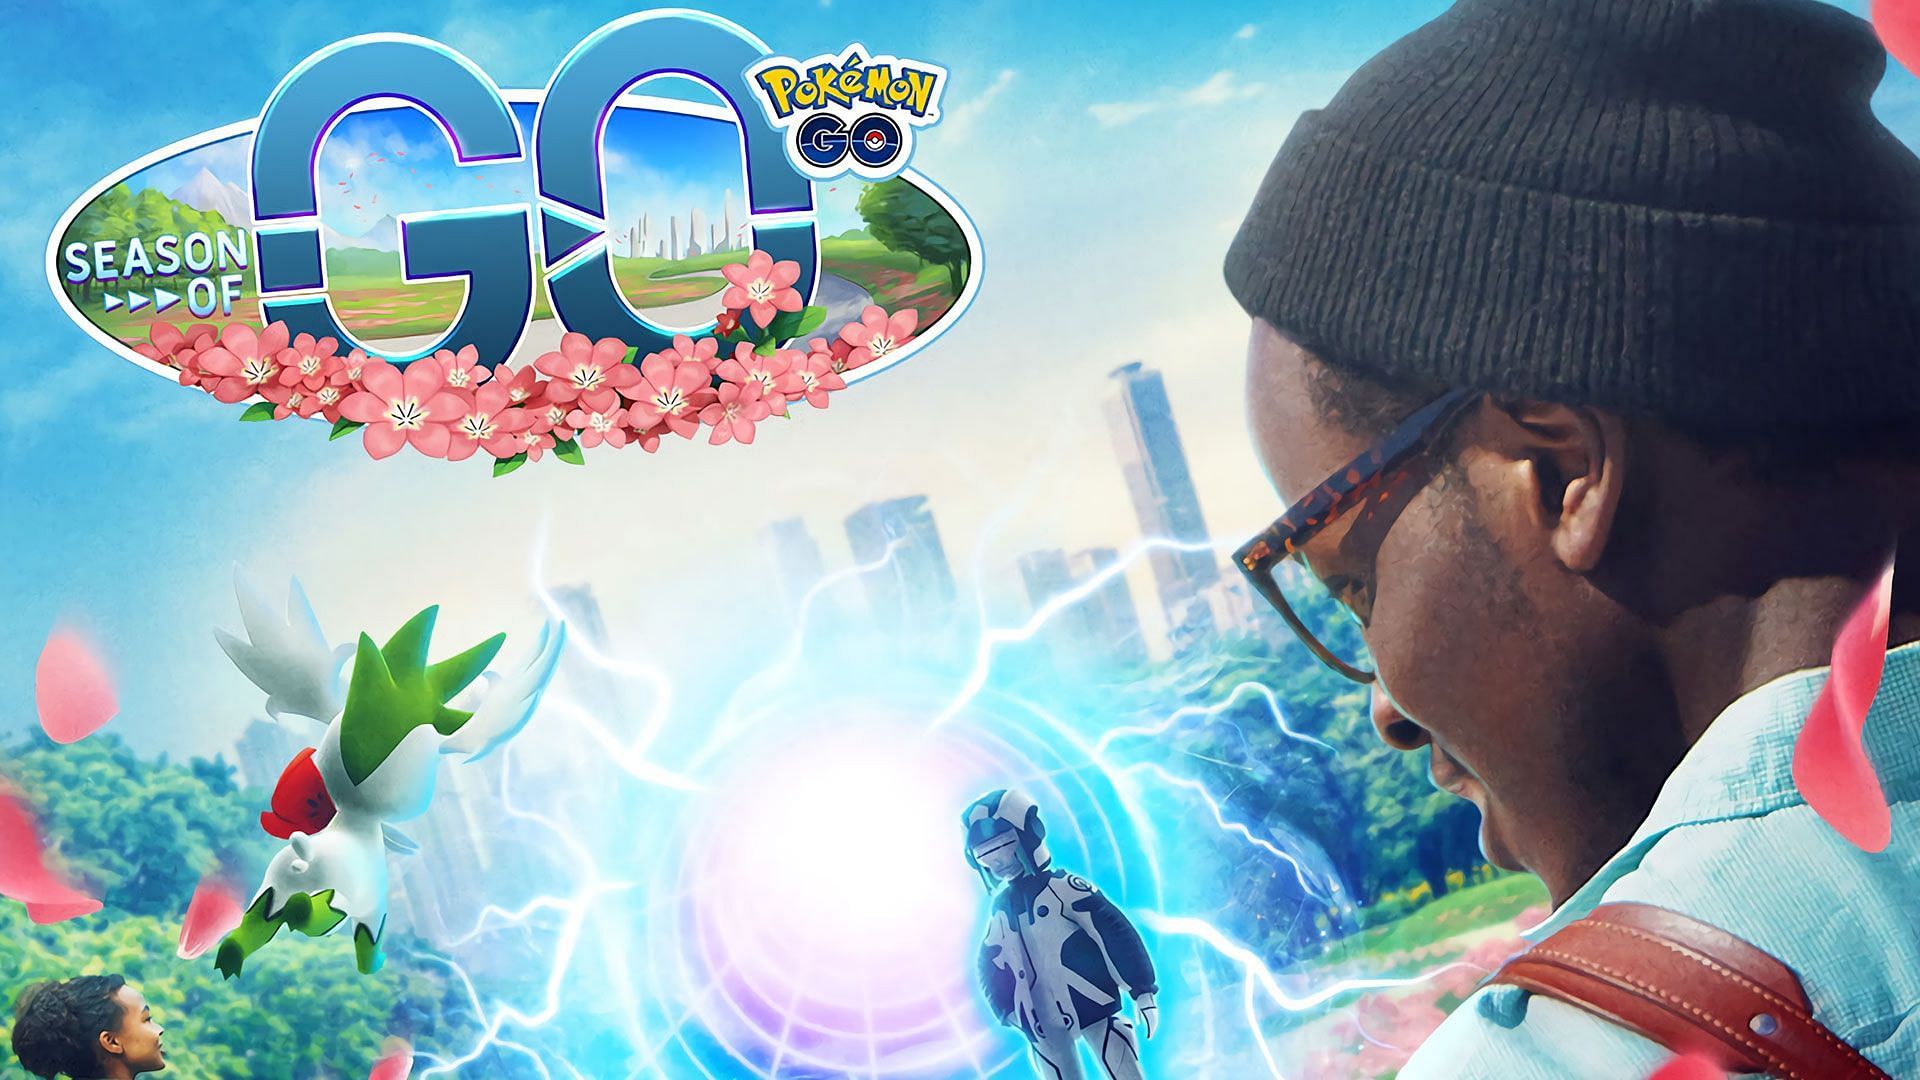 The Season of Go will conclude soon, but there are still plenty of events and content for trainers to enjoy (Image via Niantic)